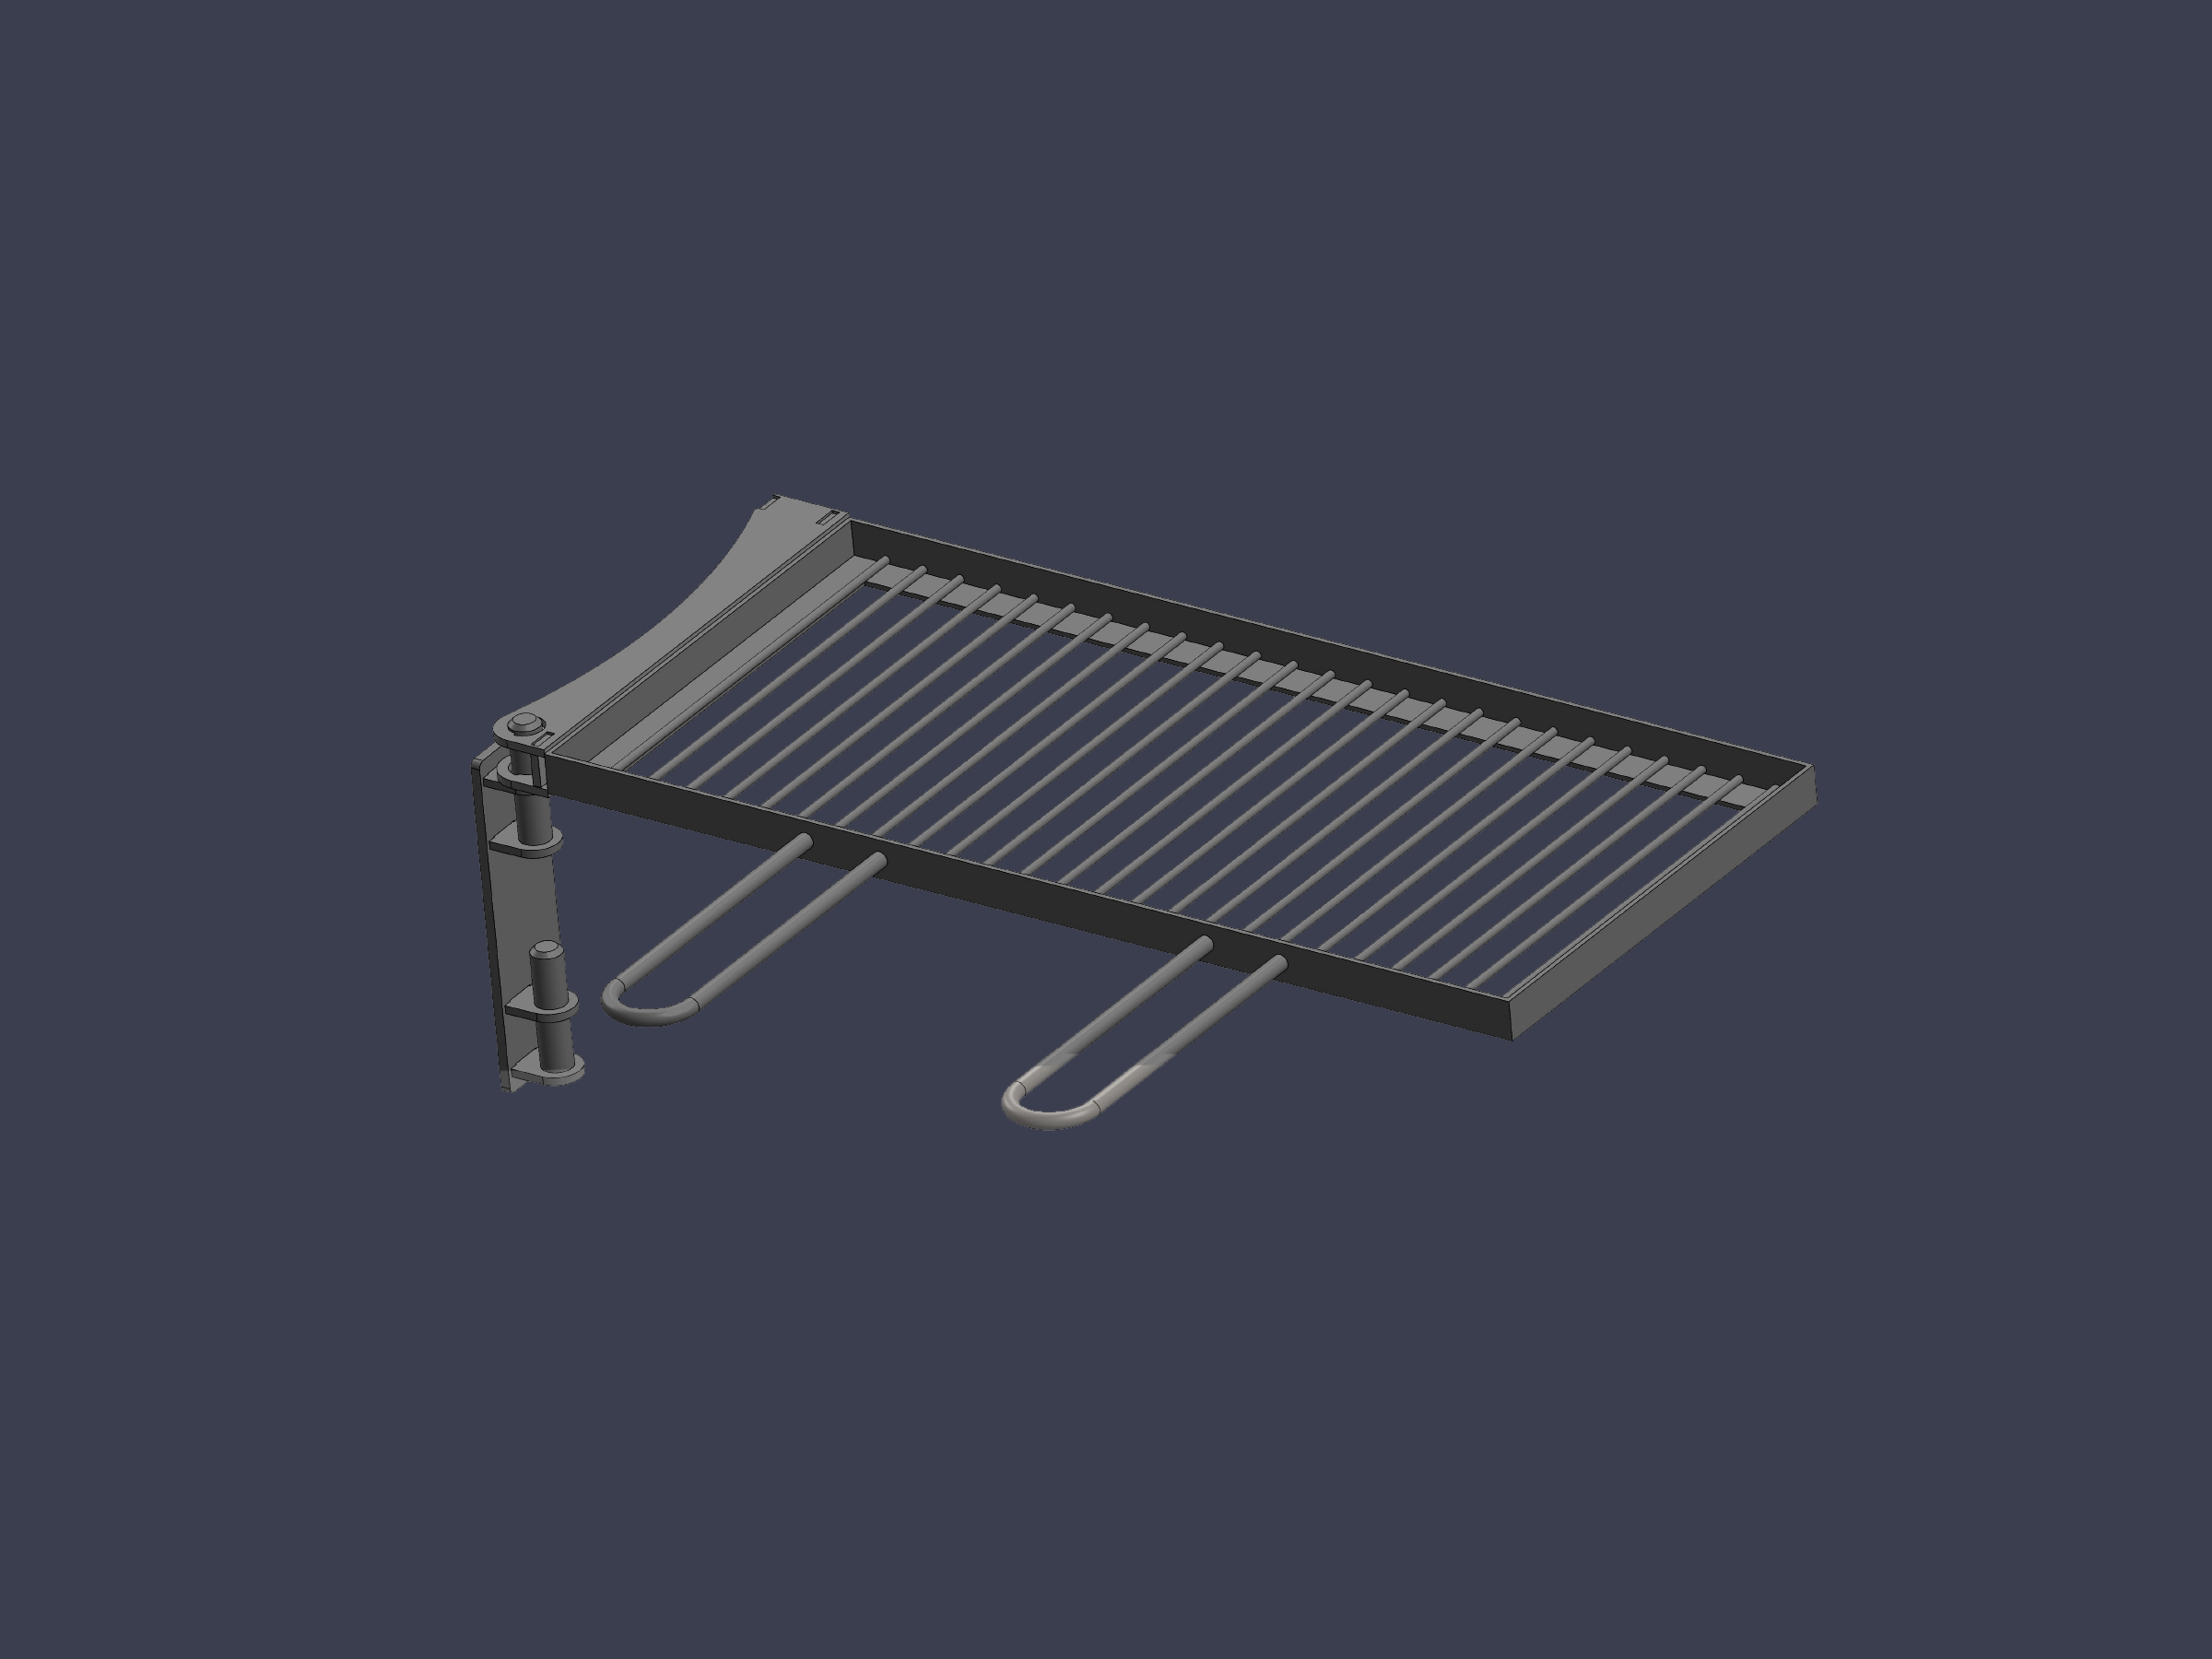 Swinging cooking grill for outdoor cooking